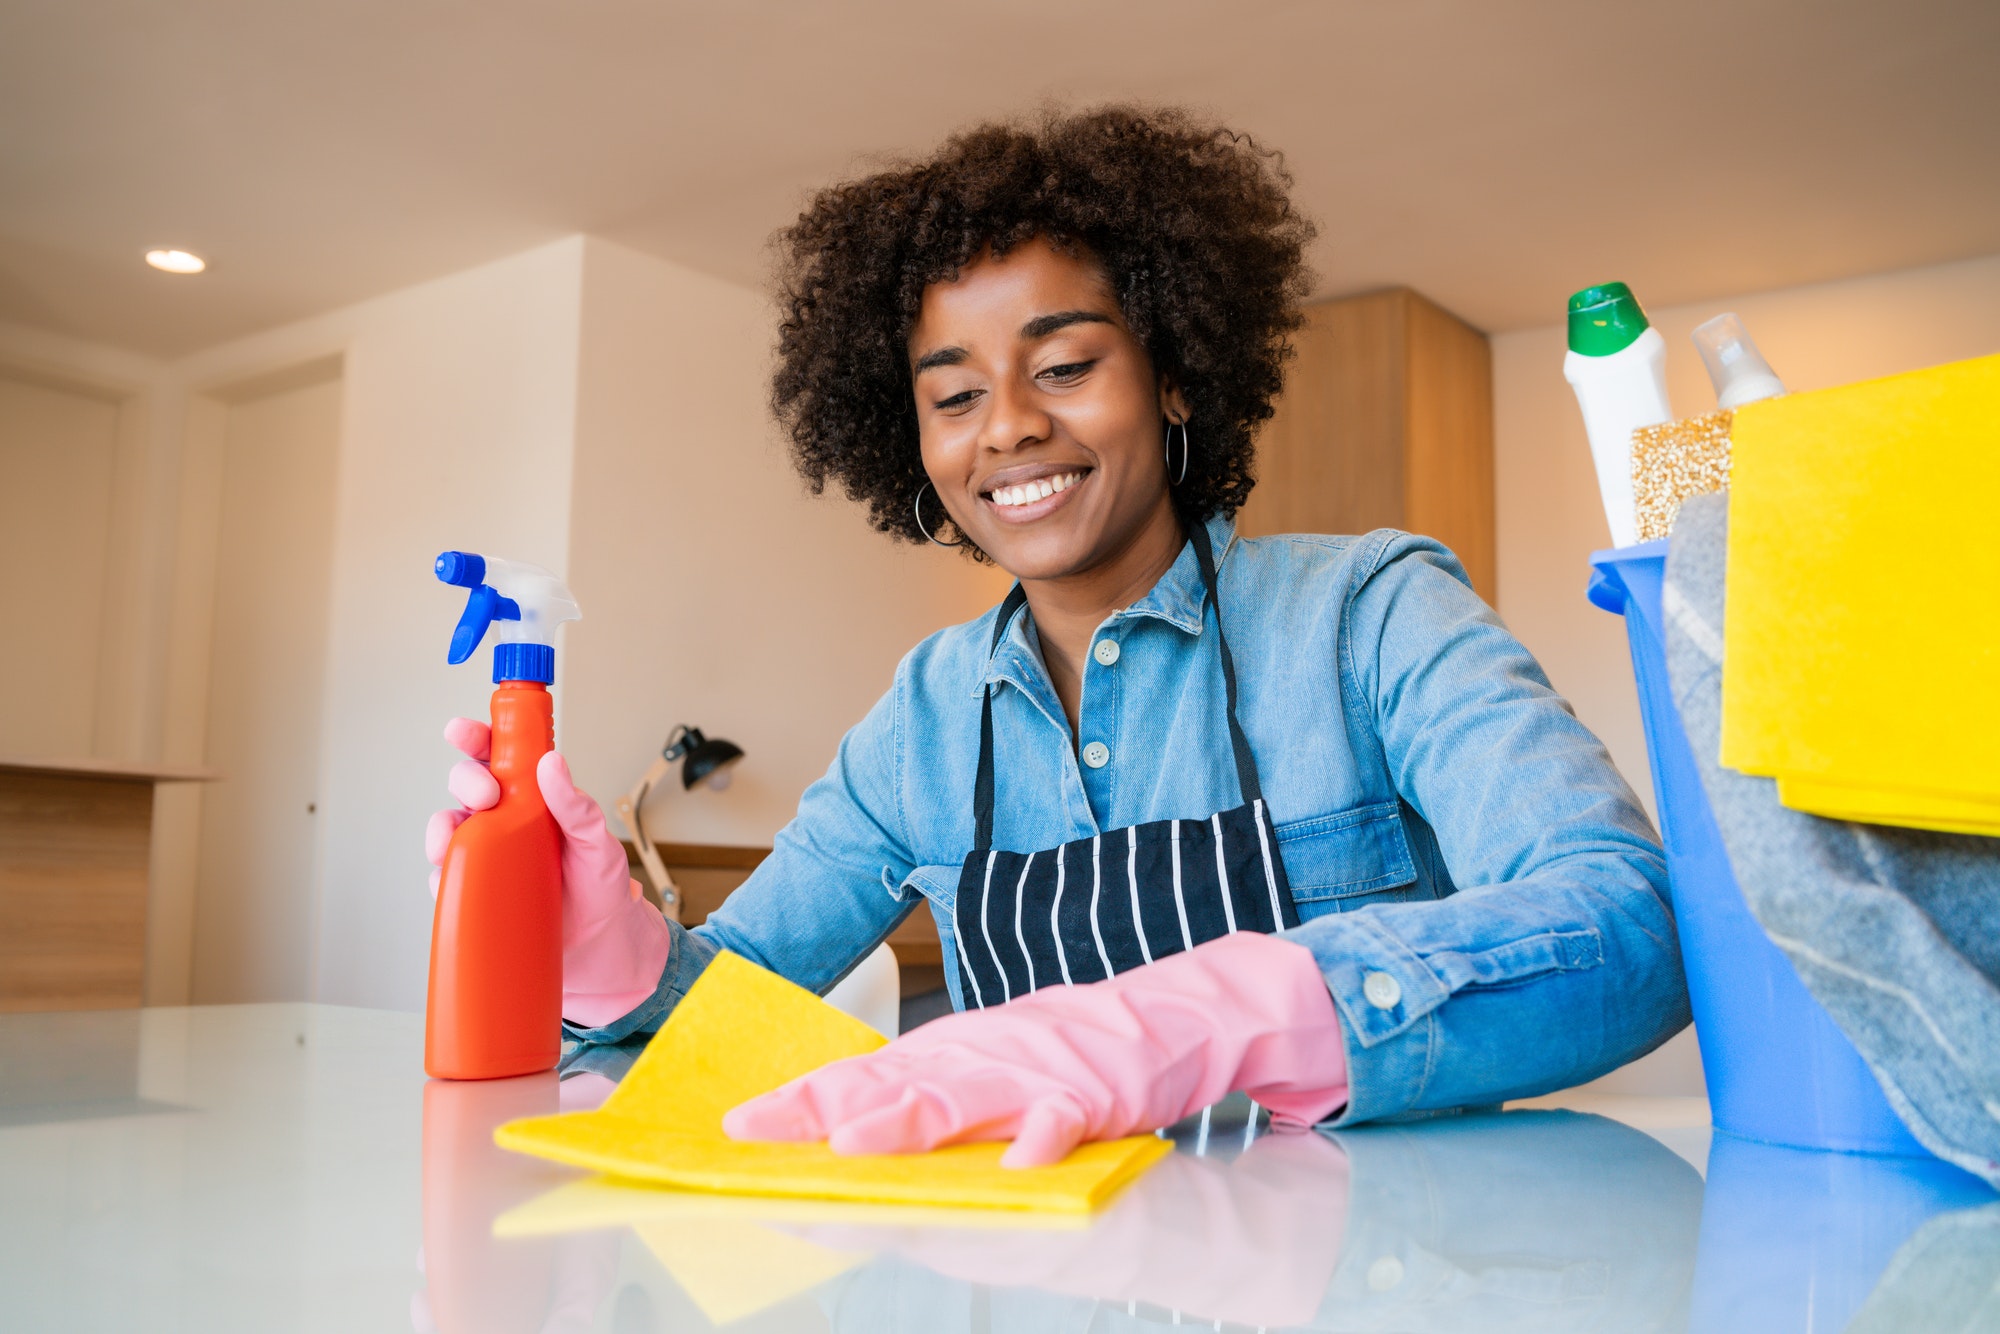 Effective apartment cleaning: how to make it easier on yourself, but keep your house clean